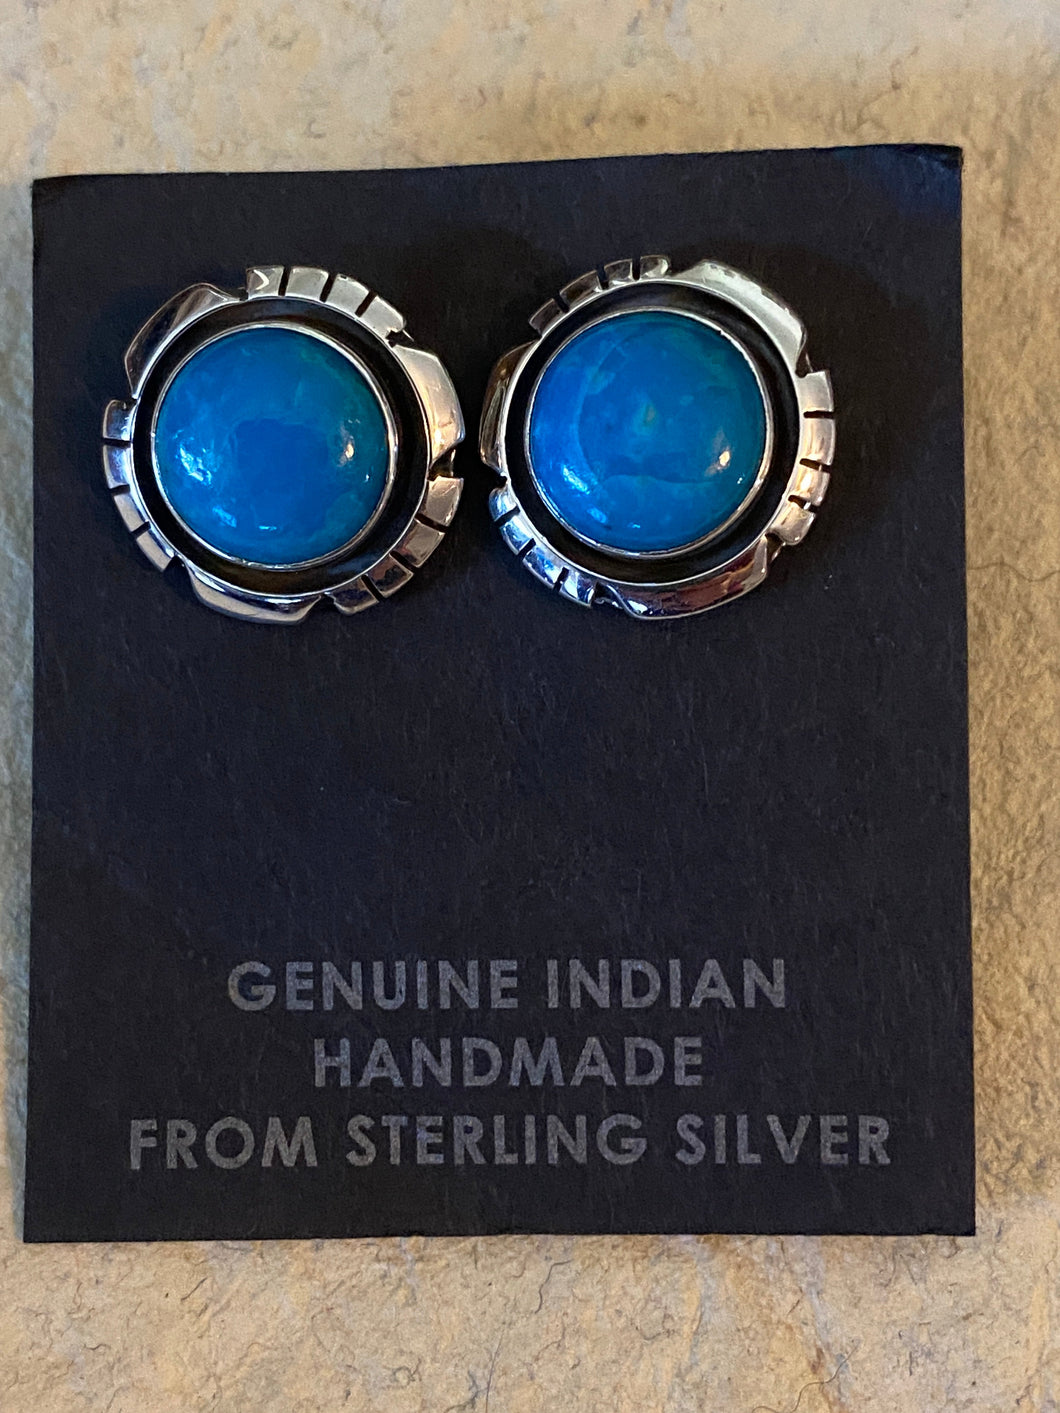 Navajo Turquoise & Sterling Silver 5/8 Inch Stud Earrings Signed